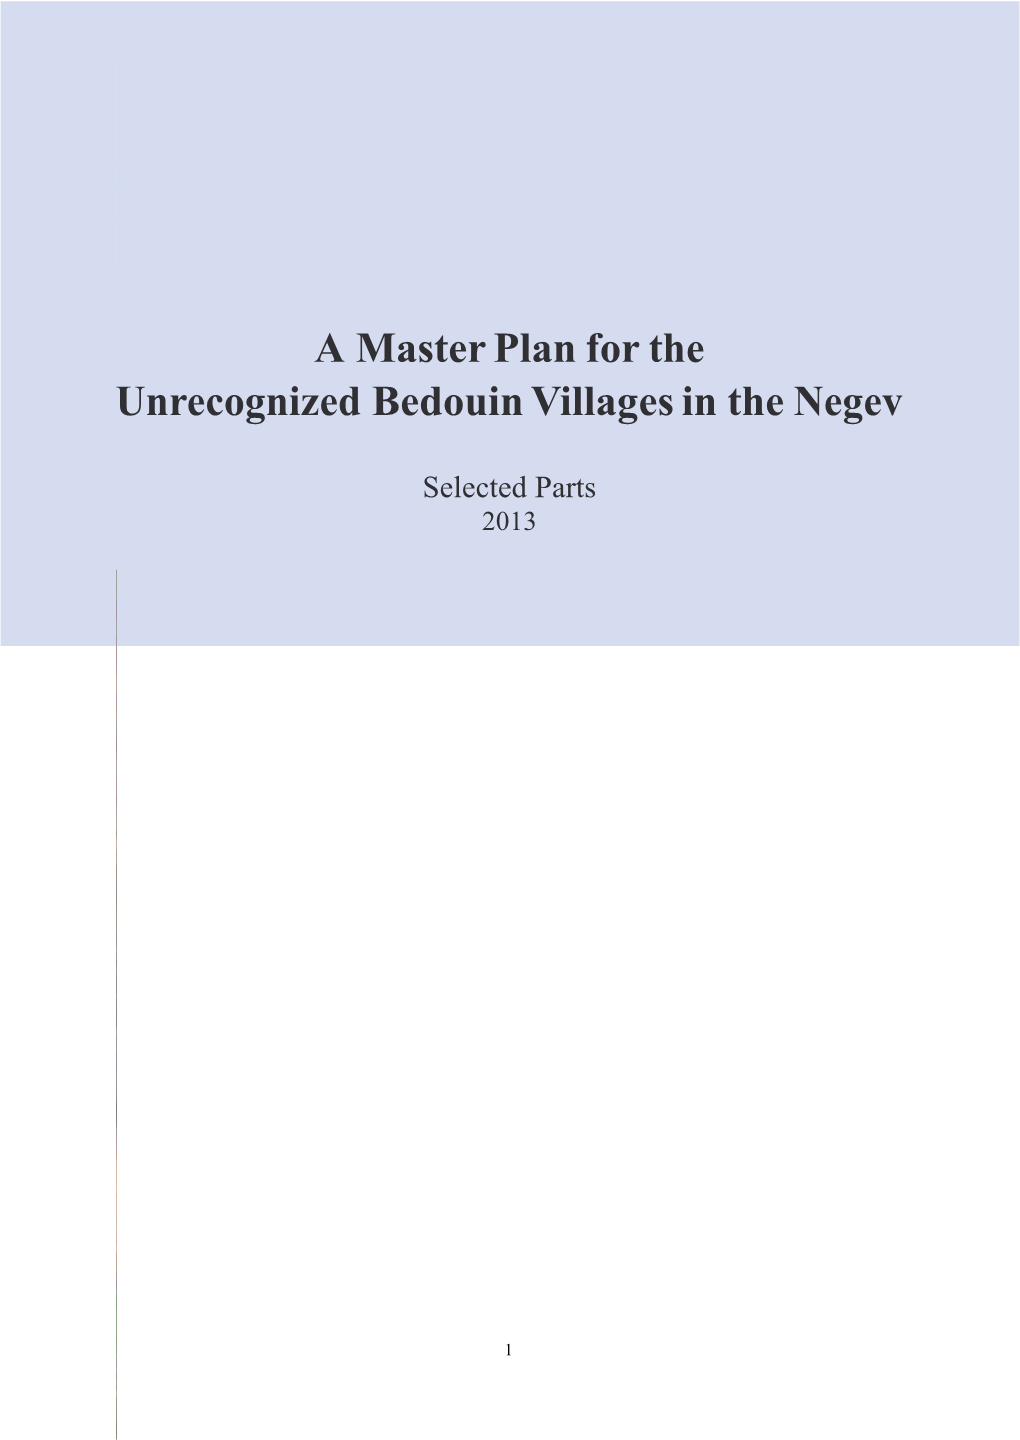 A Master Plan for the Unrecognized Bedouin Villages in the Negev